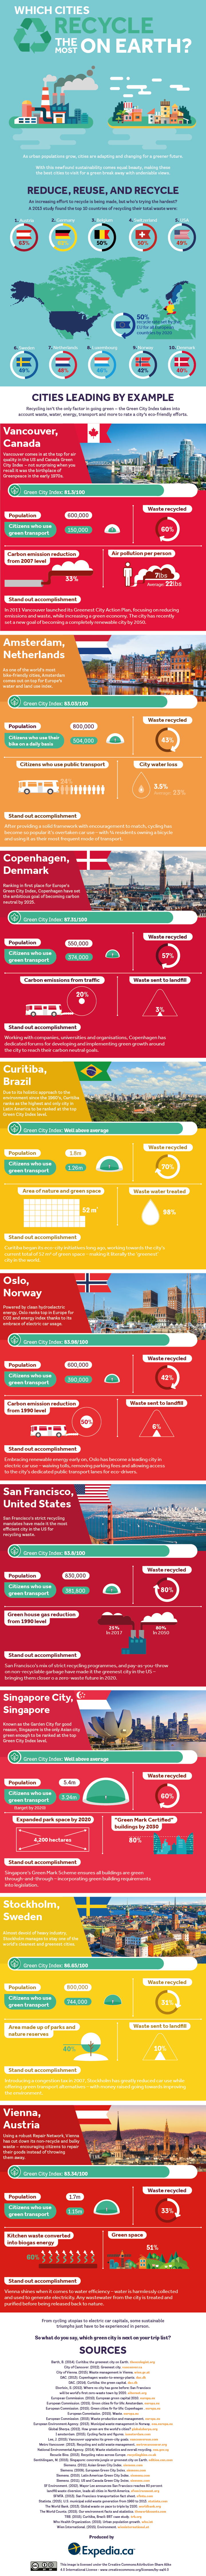 Which cities recycle the most on Earth #infographic